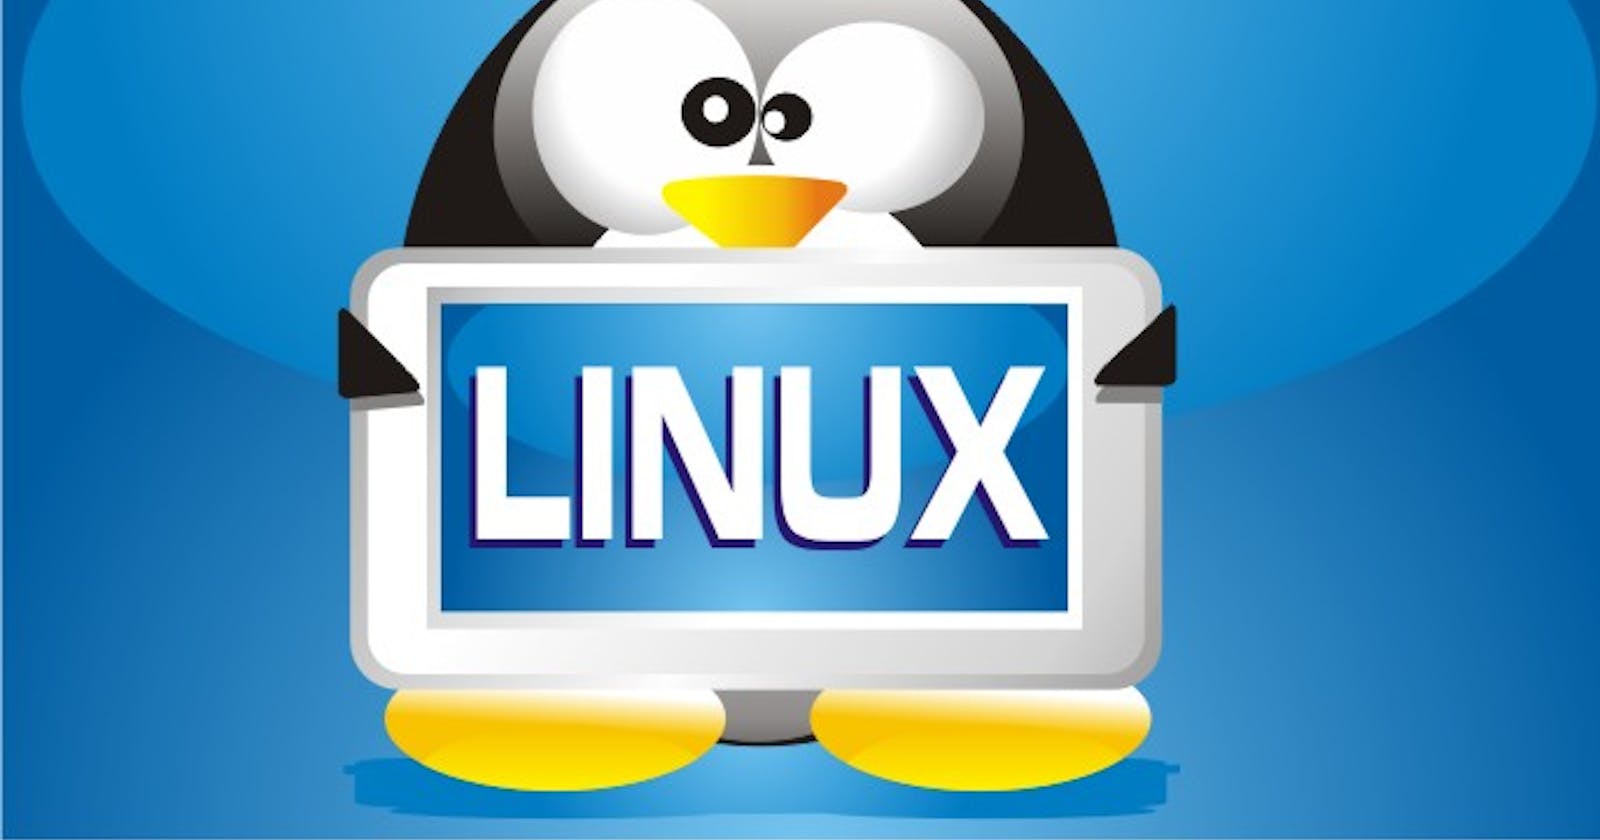 Getting started with linux